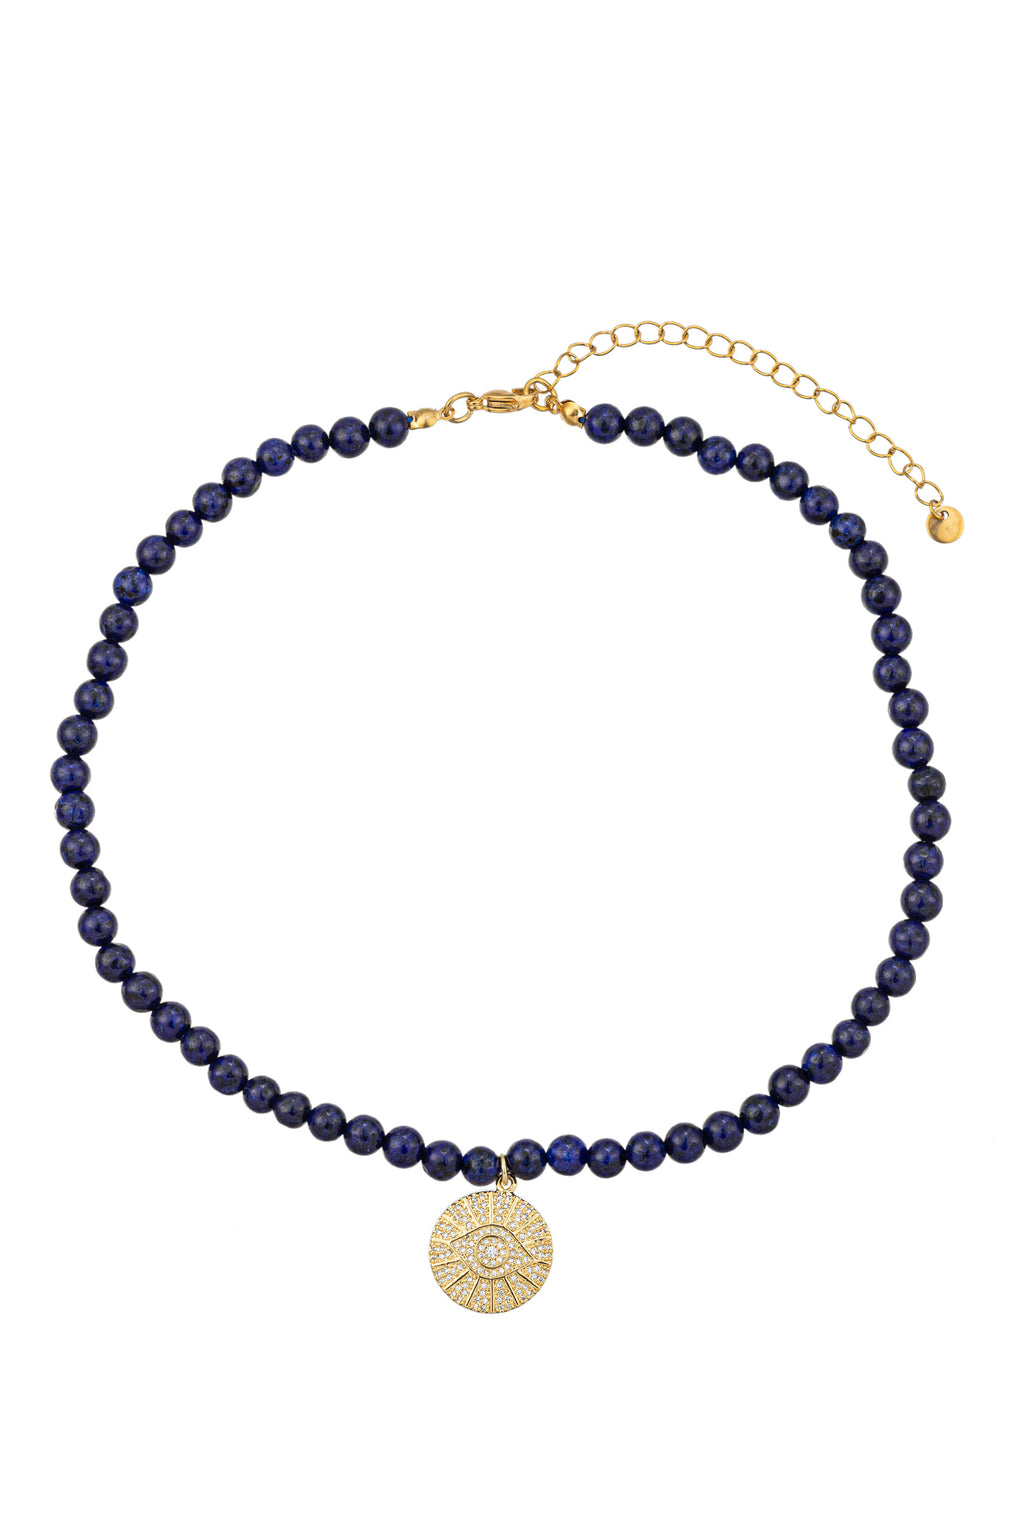 Black agate stone beaded necklace with a CZ crystal gold evil eye pendant.